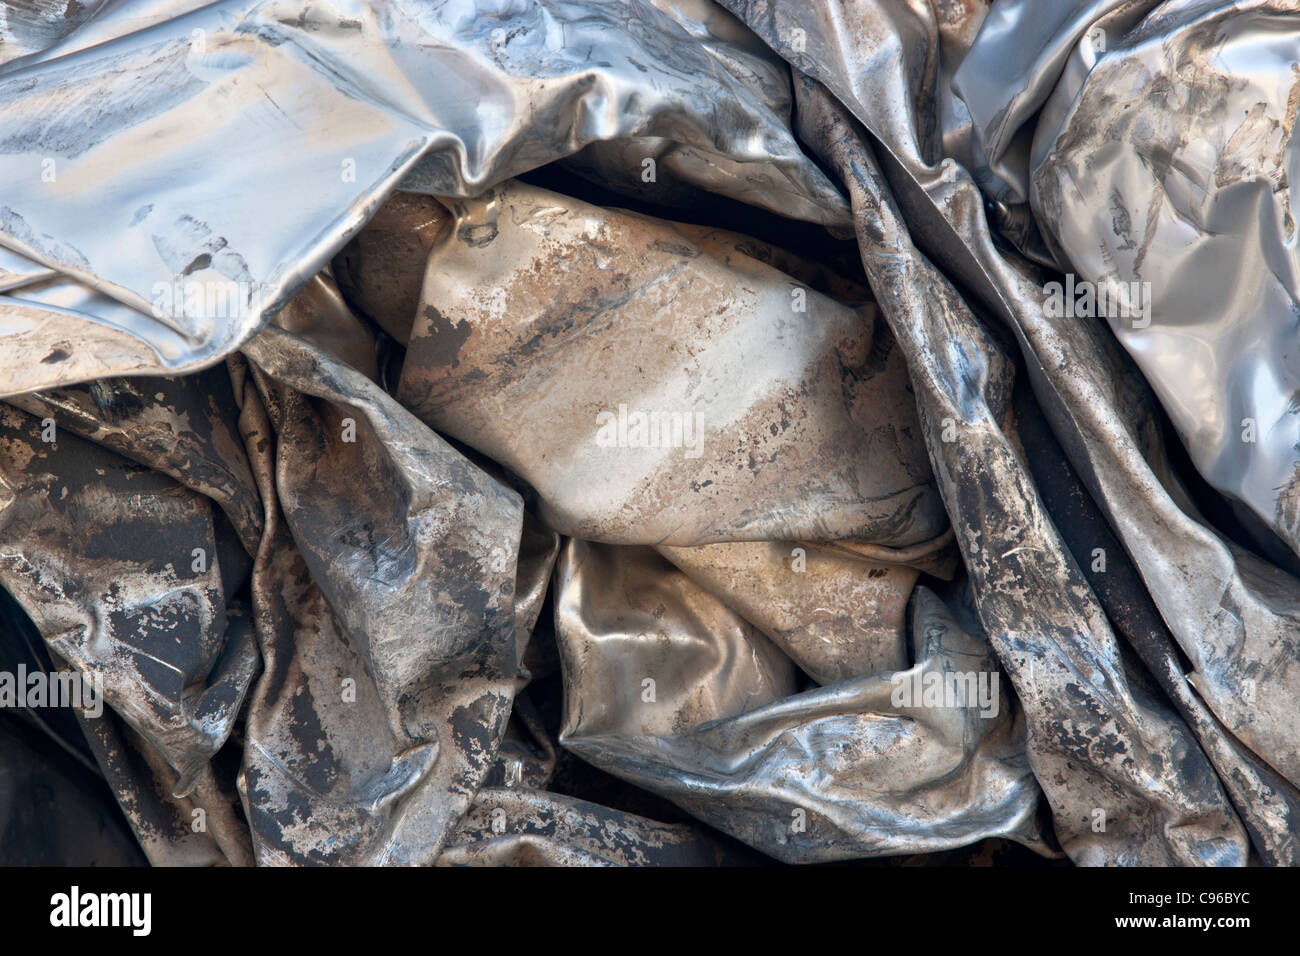 Recycling, compacted stainless steel sheeting Stock Photo